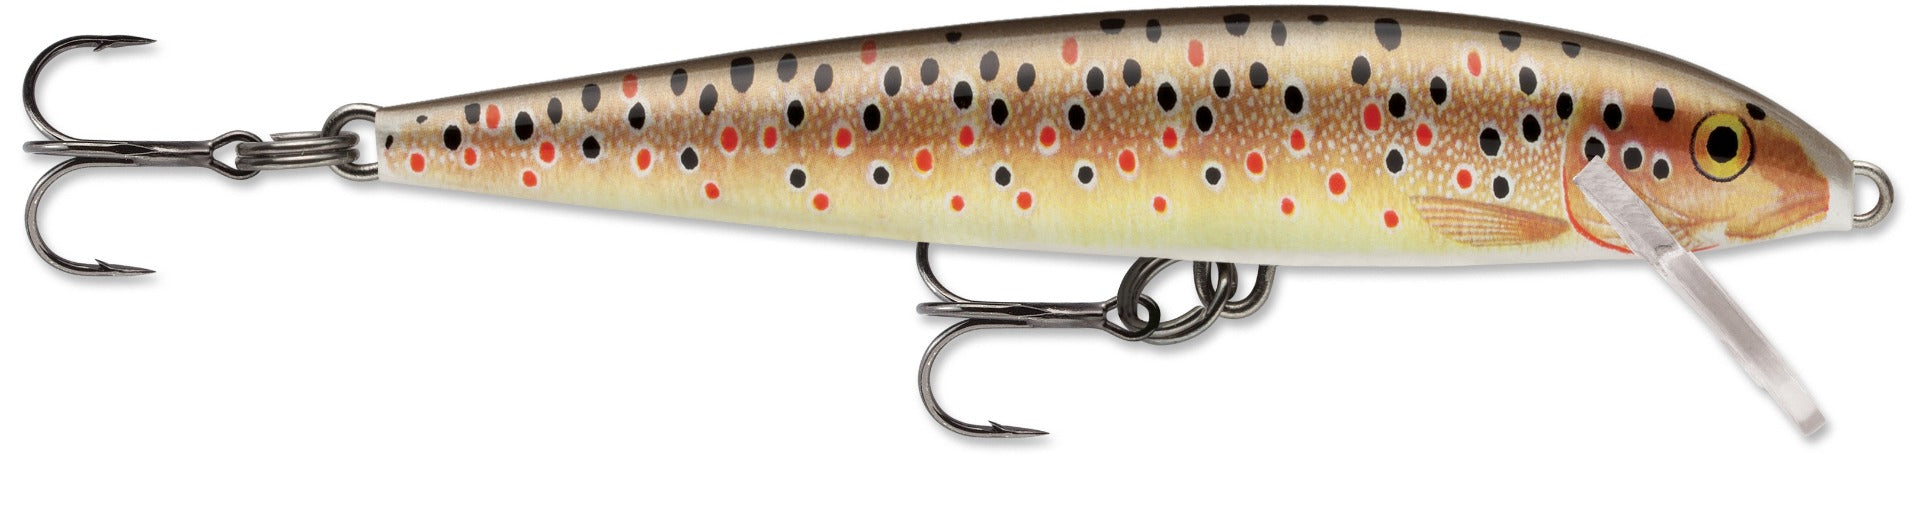 Original Floater_Brown Trout